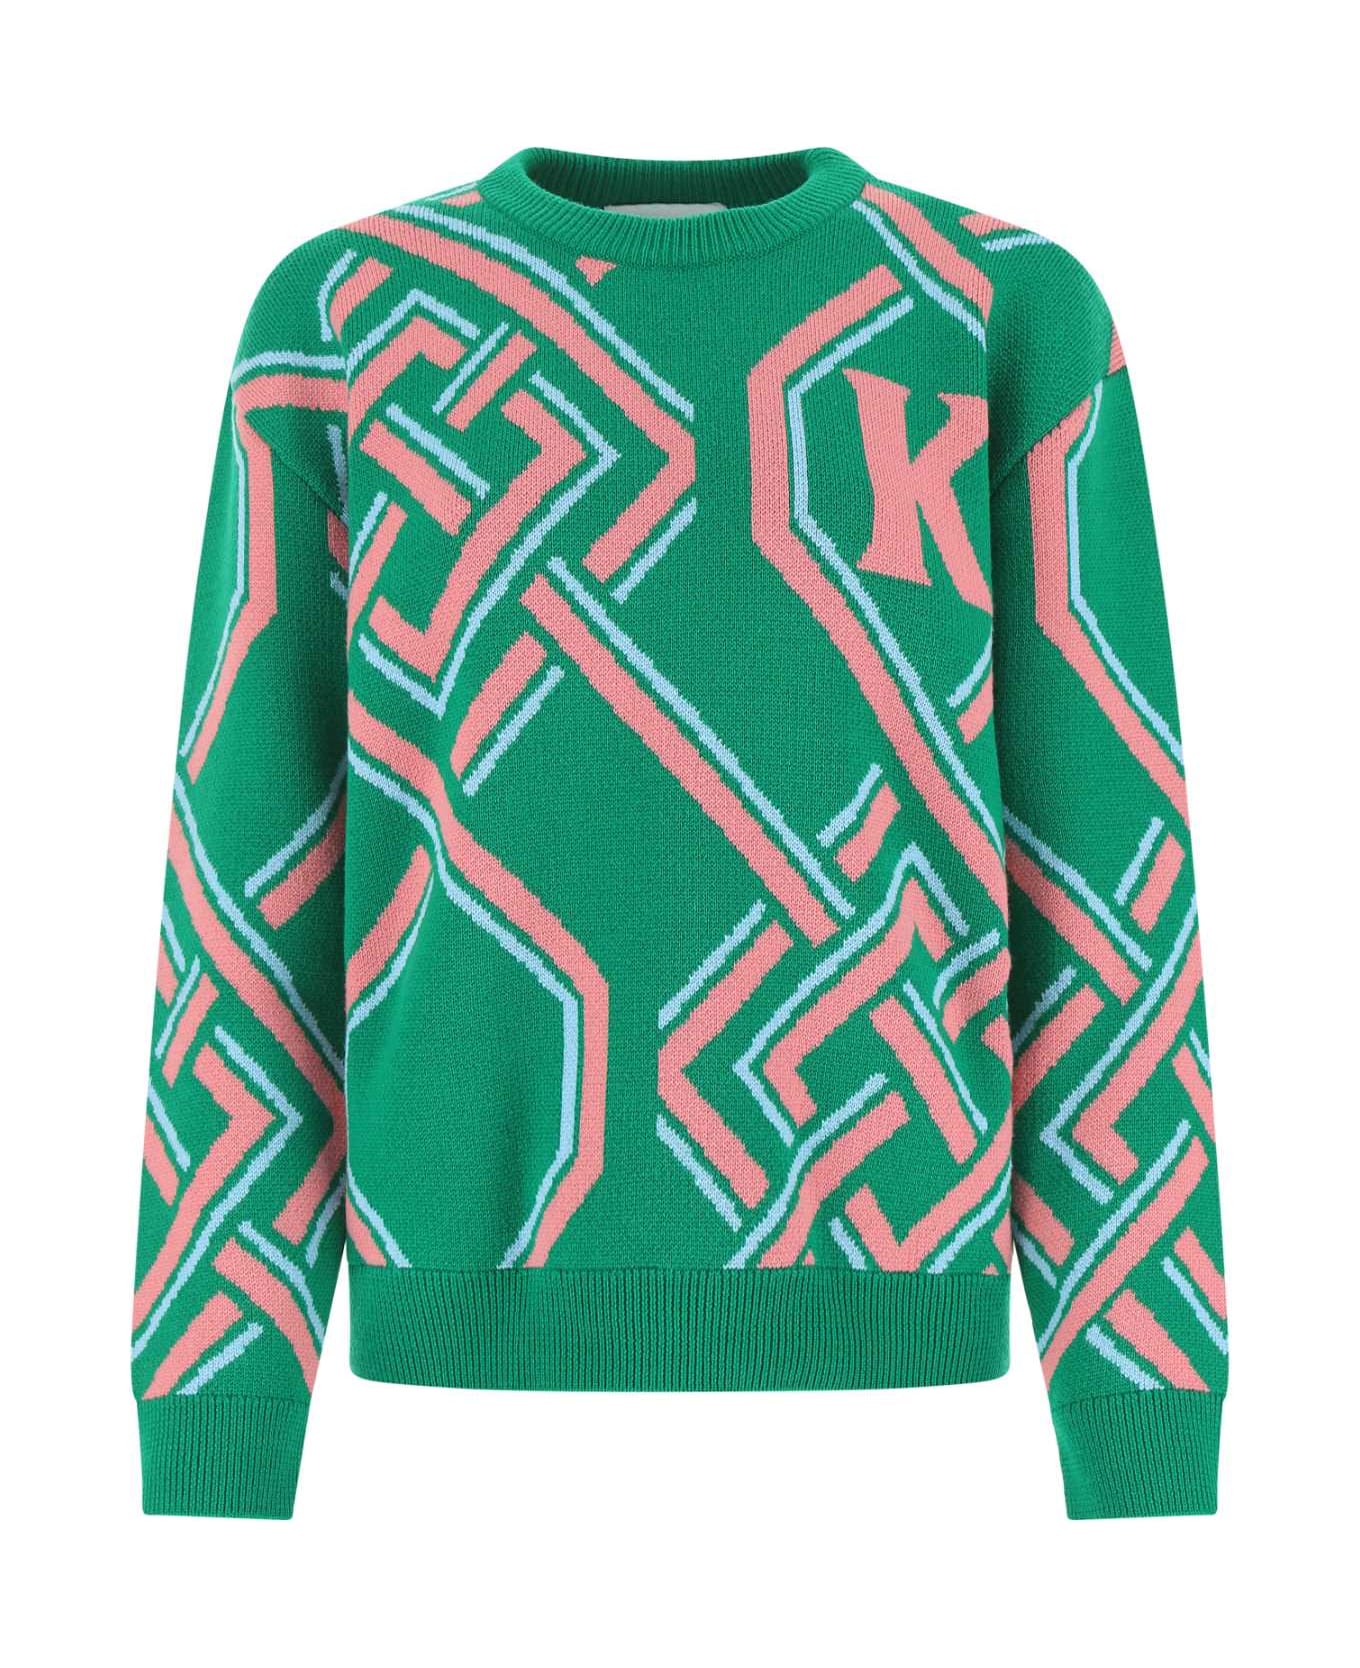 Koché Embroidered Wool Blend Sweater - 638F